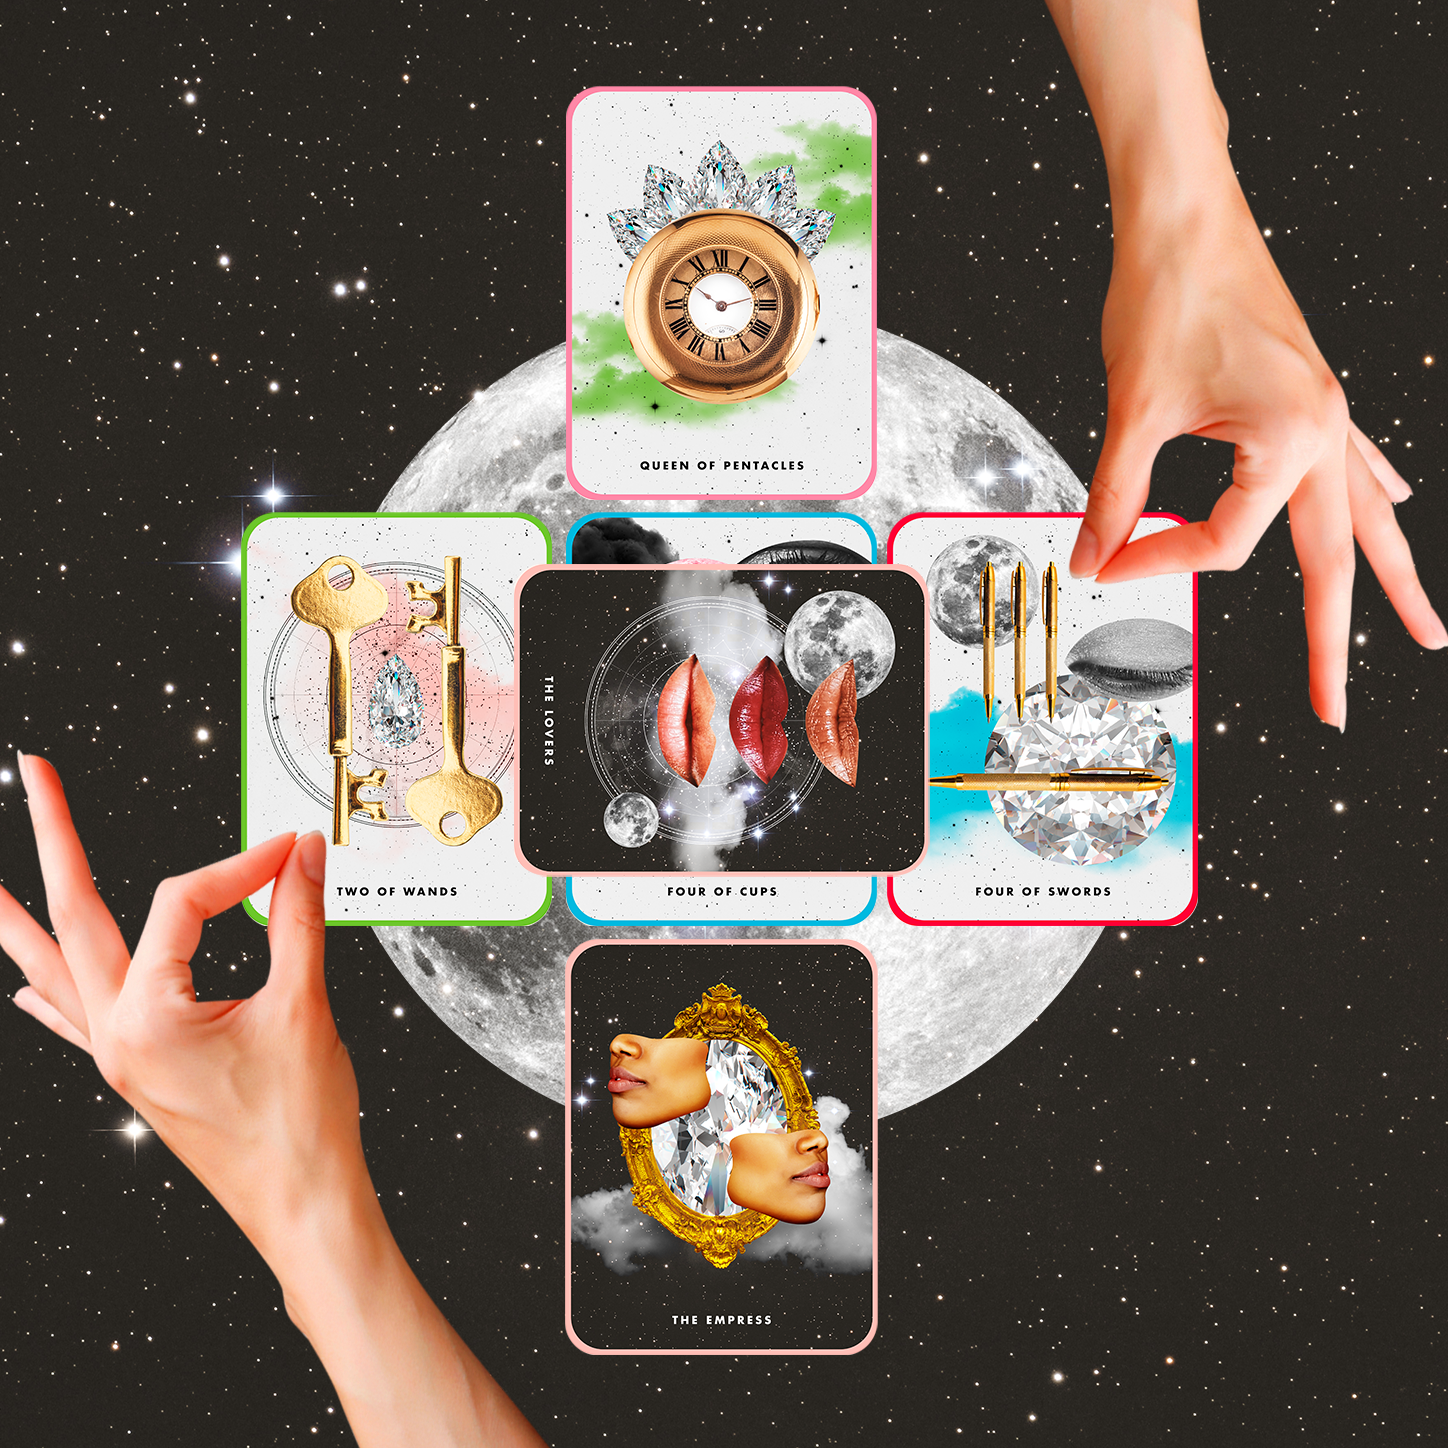 Your Weekly Tarot Card Reading Wants You to Fake It Til You Make It